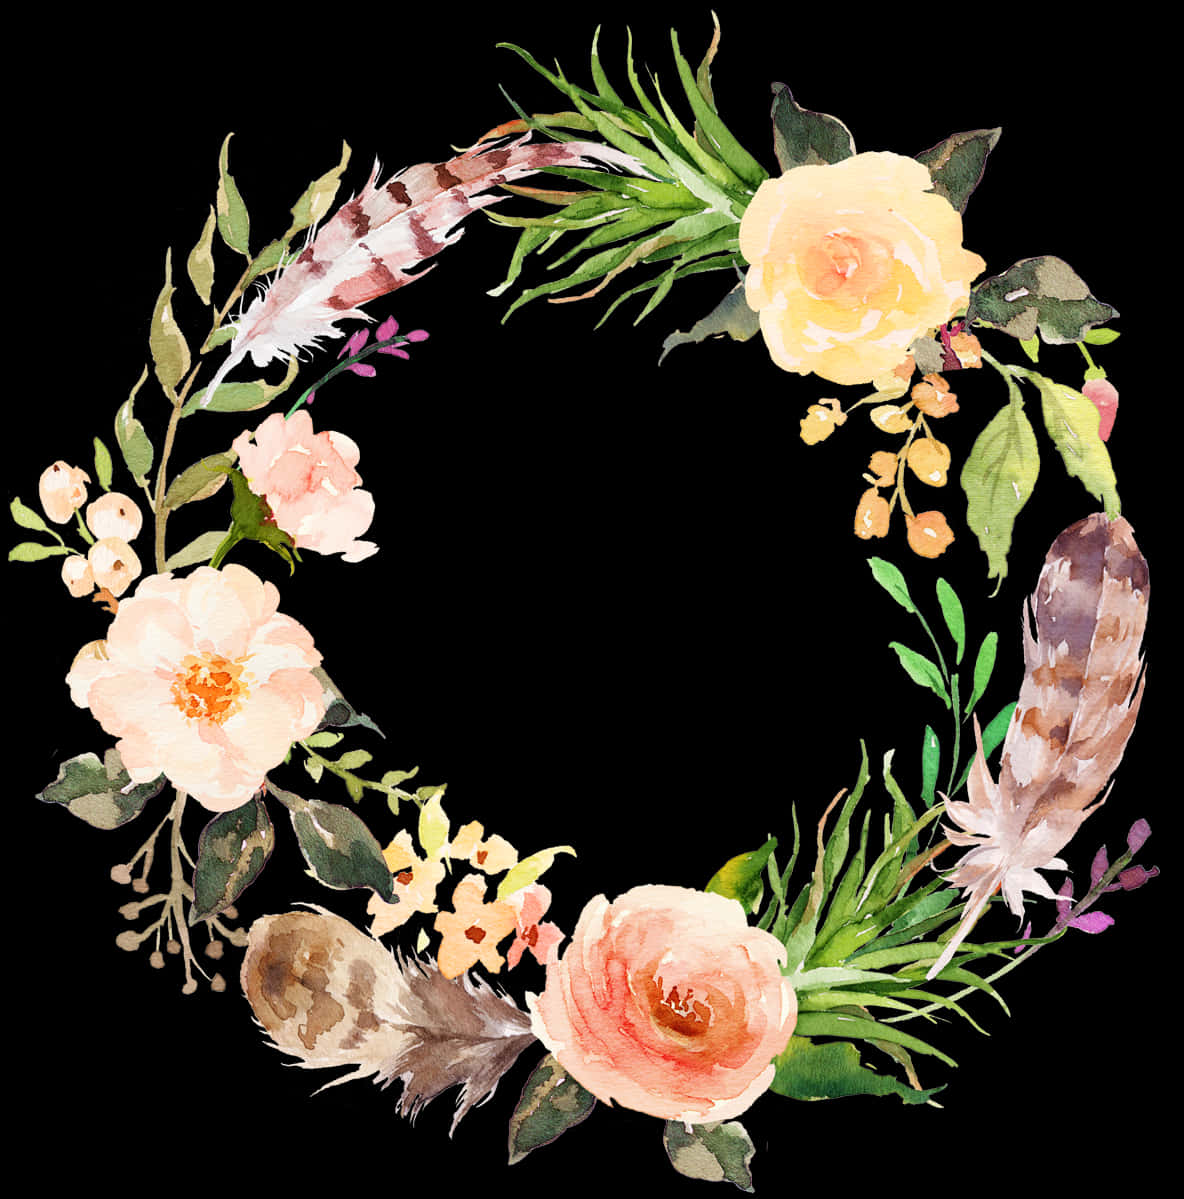 A Wreath Of Flowers And Feathers